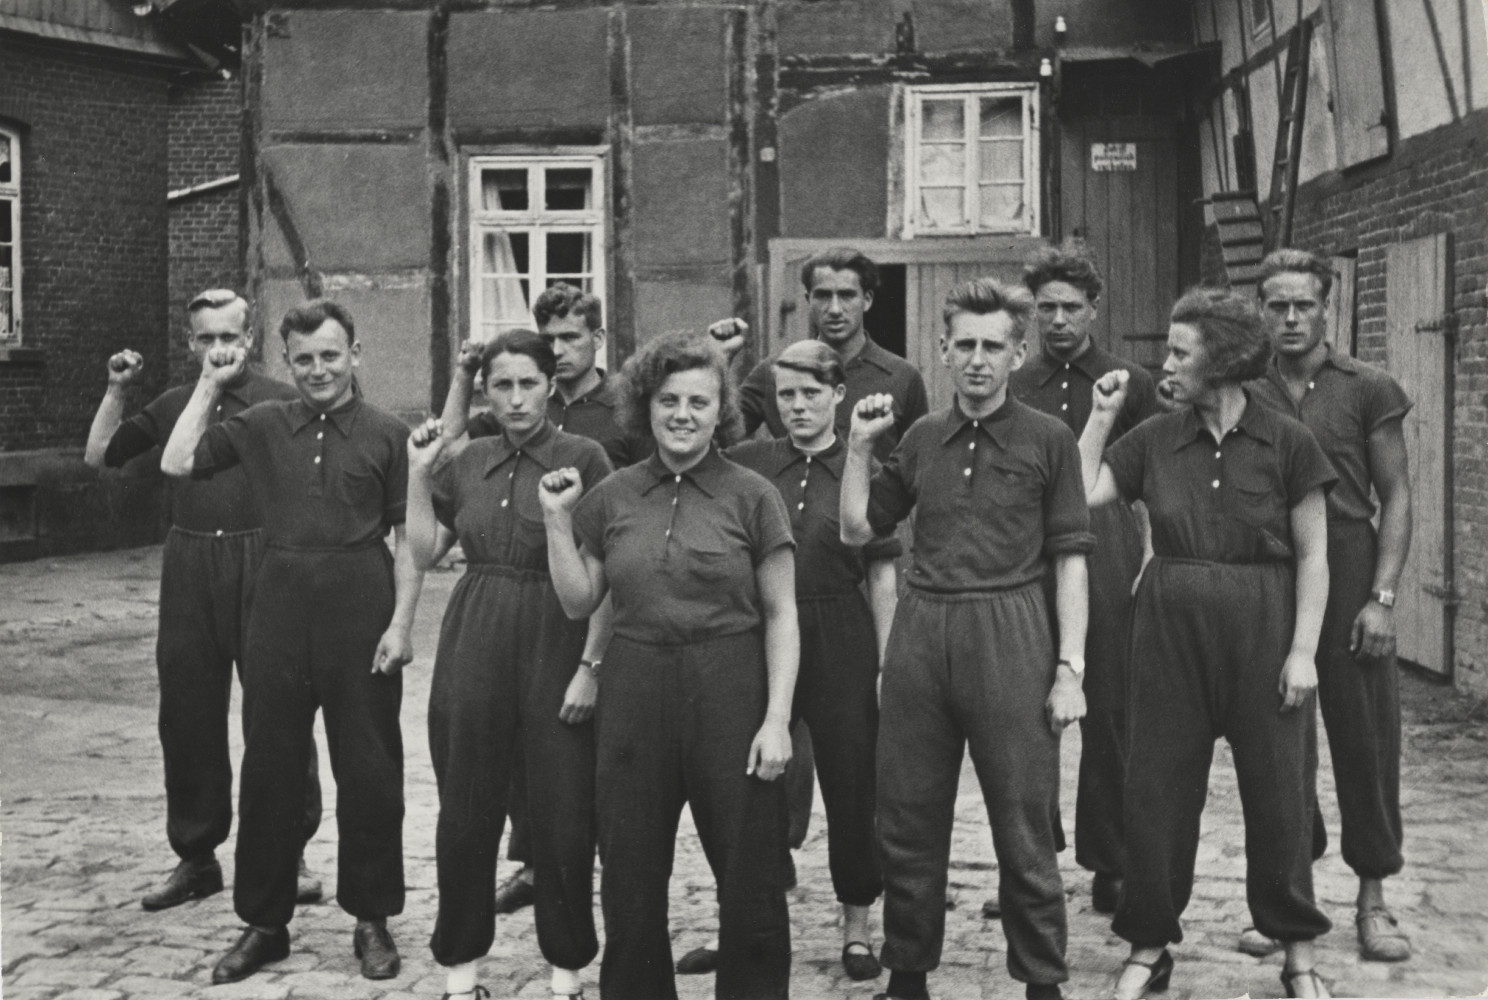 Hanover: The agitprop group "Rote Kolonne” [Red Column] in the backyard of the Bunte Tavern in Knochenhauerstrasse, June/July 1932. In the middle of the back row is workers' photographer Walter Ballhause. In the middle row on the left is Fritz Treu and Ilse Rohrer who was later to become his wife, at the front on the right is Otto Brenner's brother Kurt Brenner. Walter Ballhause Archive, Plauen